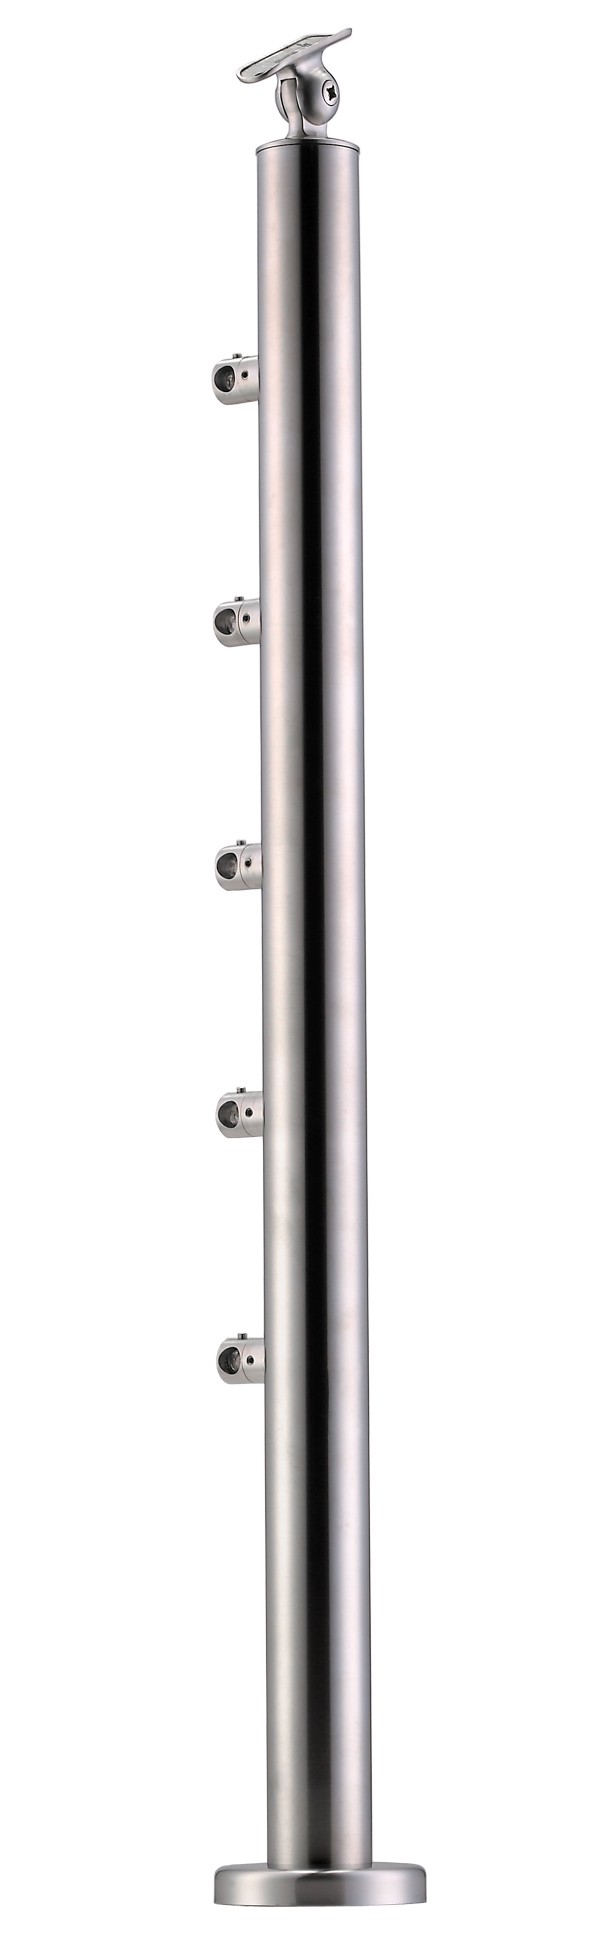 Stainless Steel Balustrade Posts - Tubular - SS:2020557A